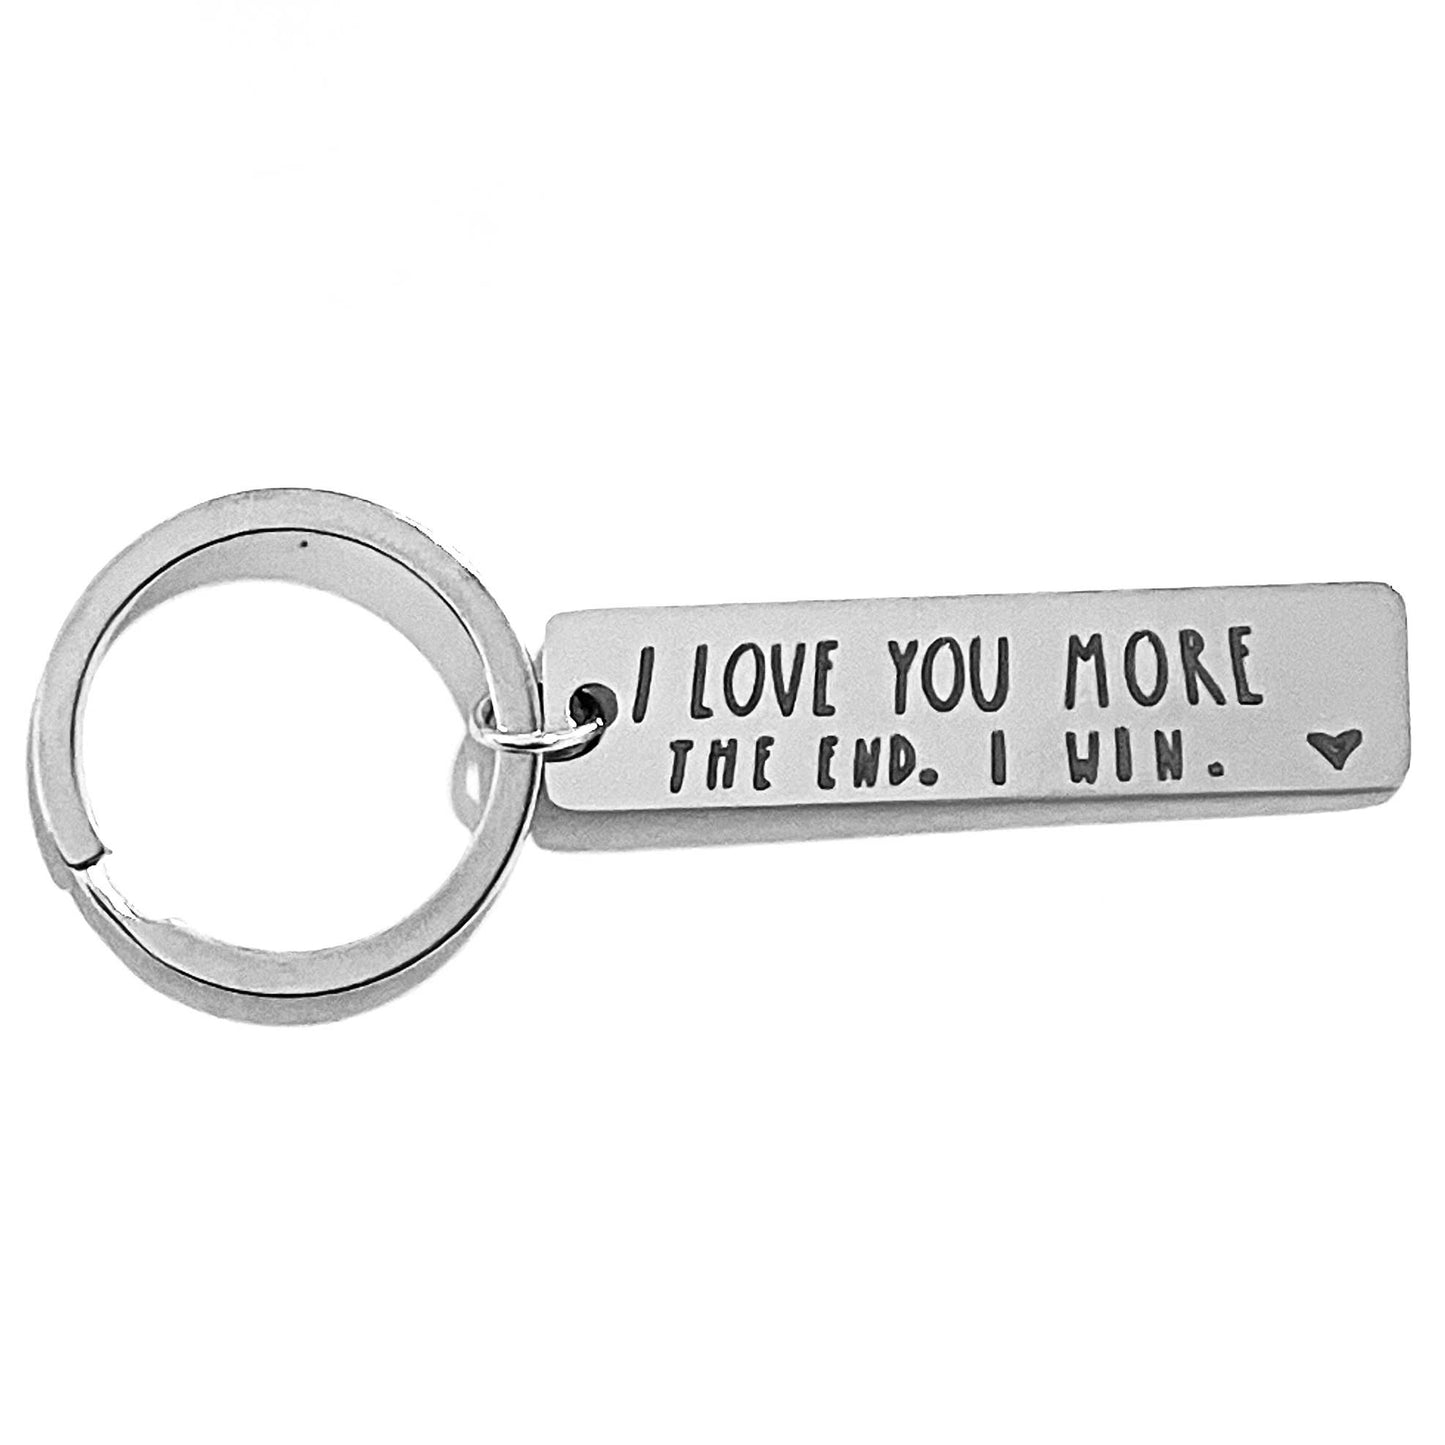 I Love You More The End I Win Silver Keychain Keyring